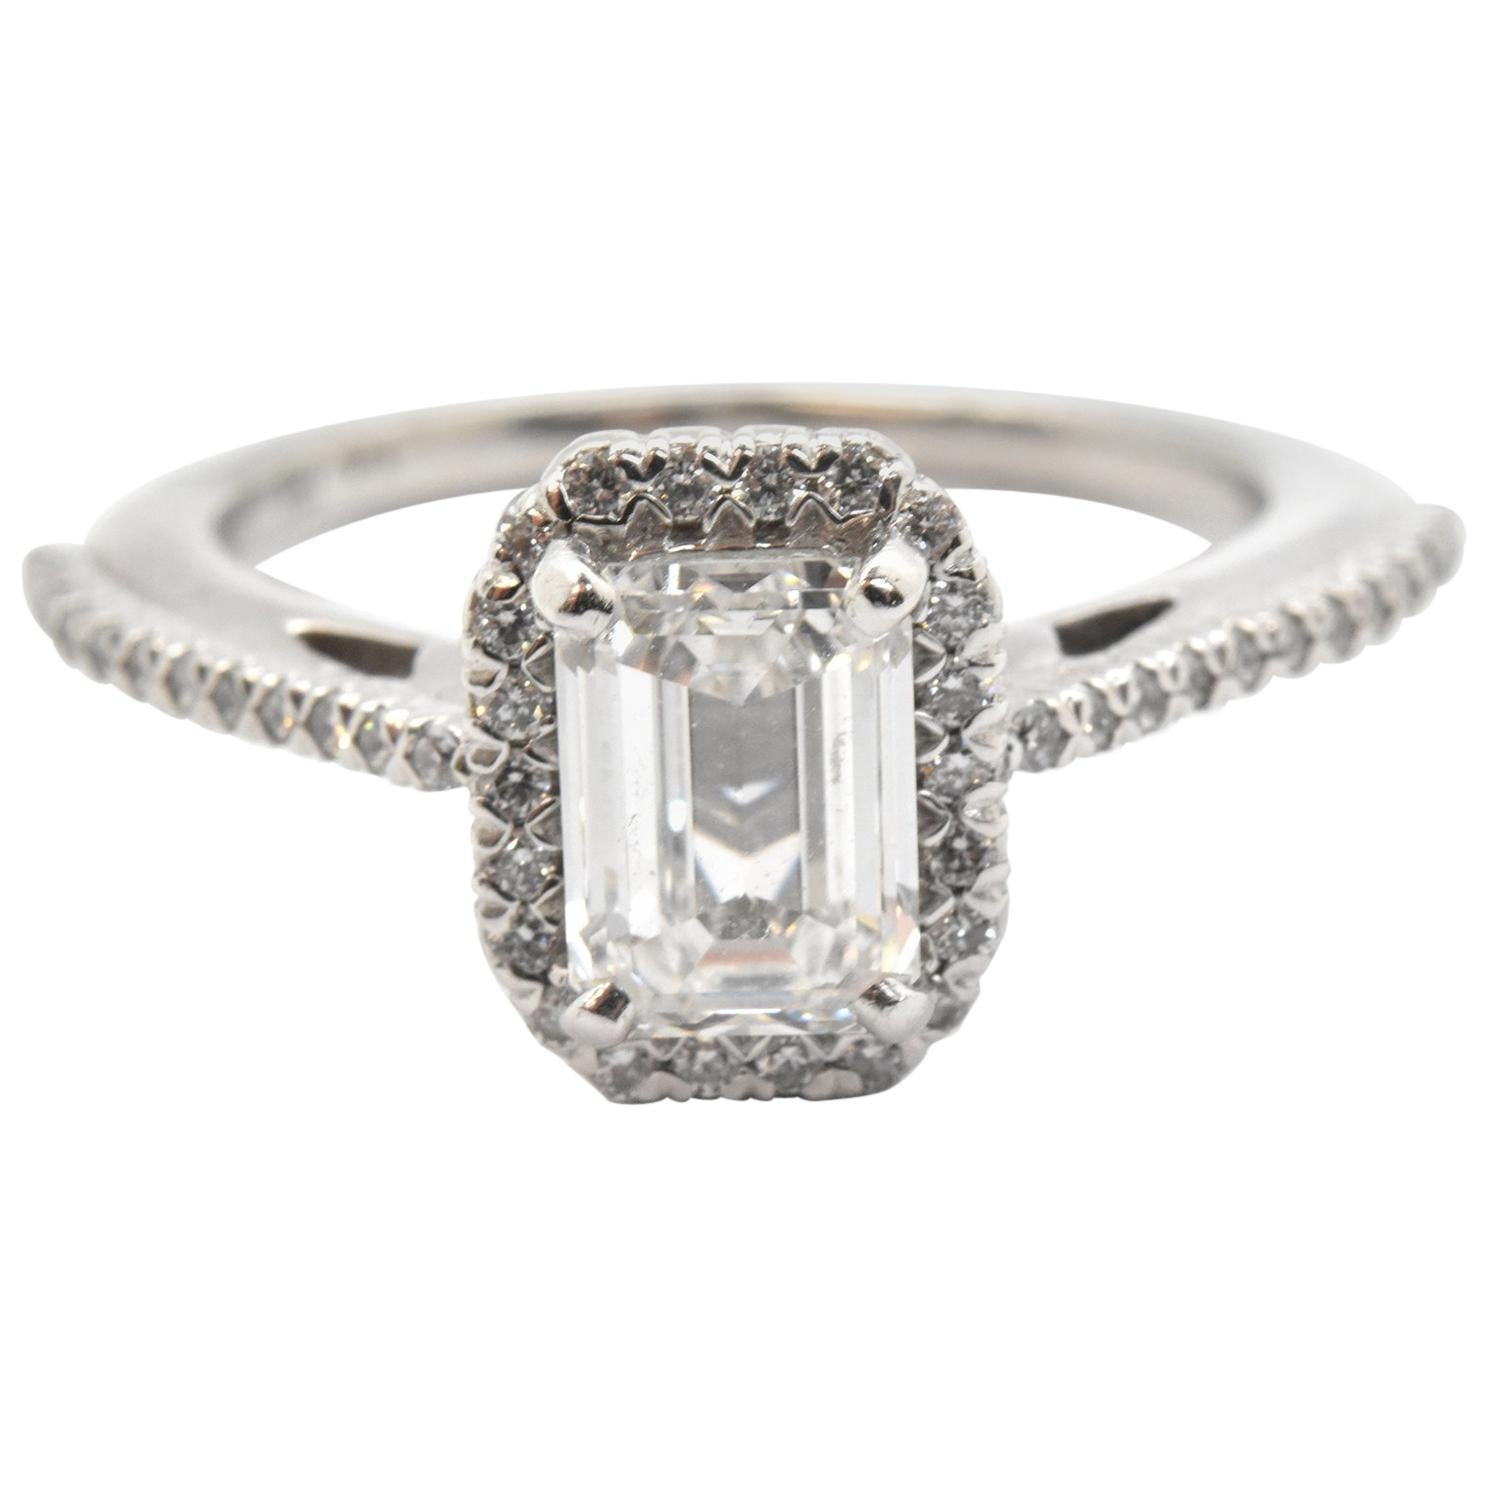 14 Karat White Gold and GIA 1.07 Carat Emerald-Cut Diamond Ring with Accents